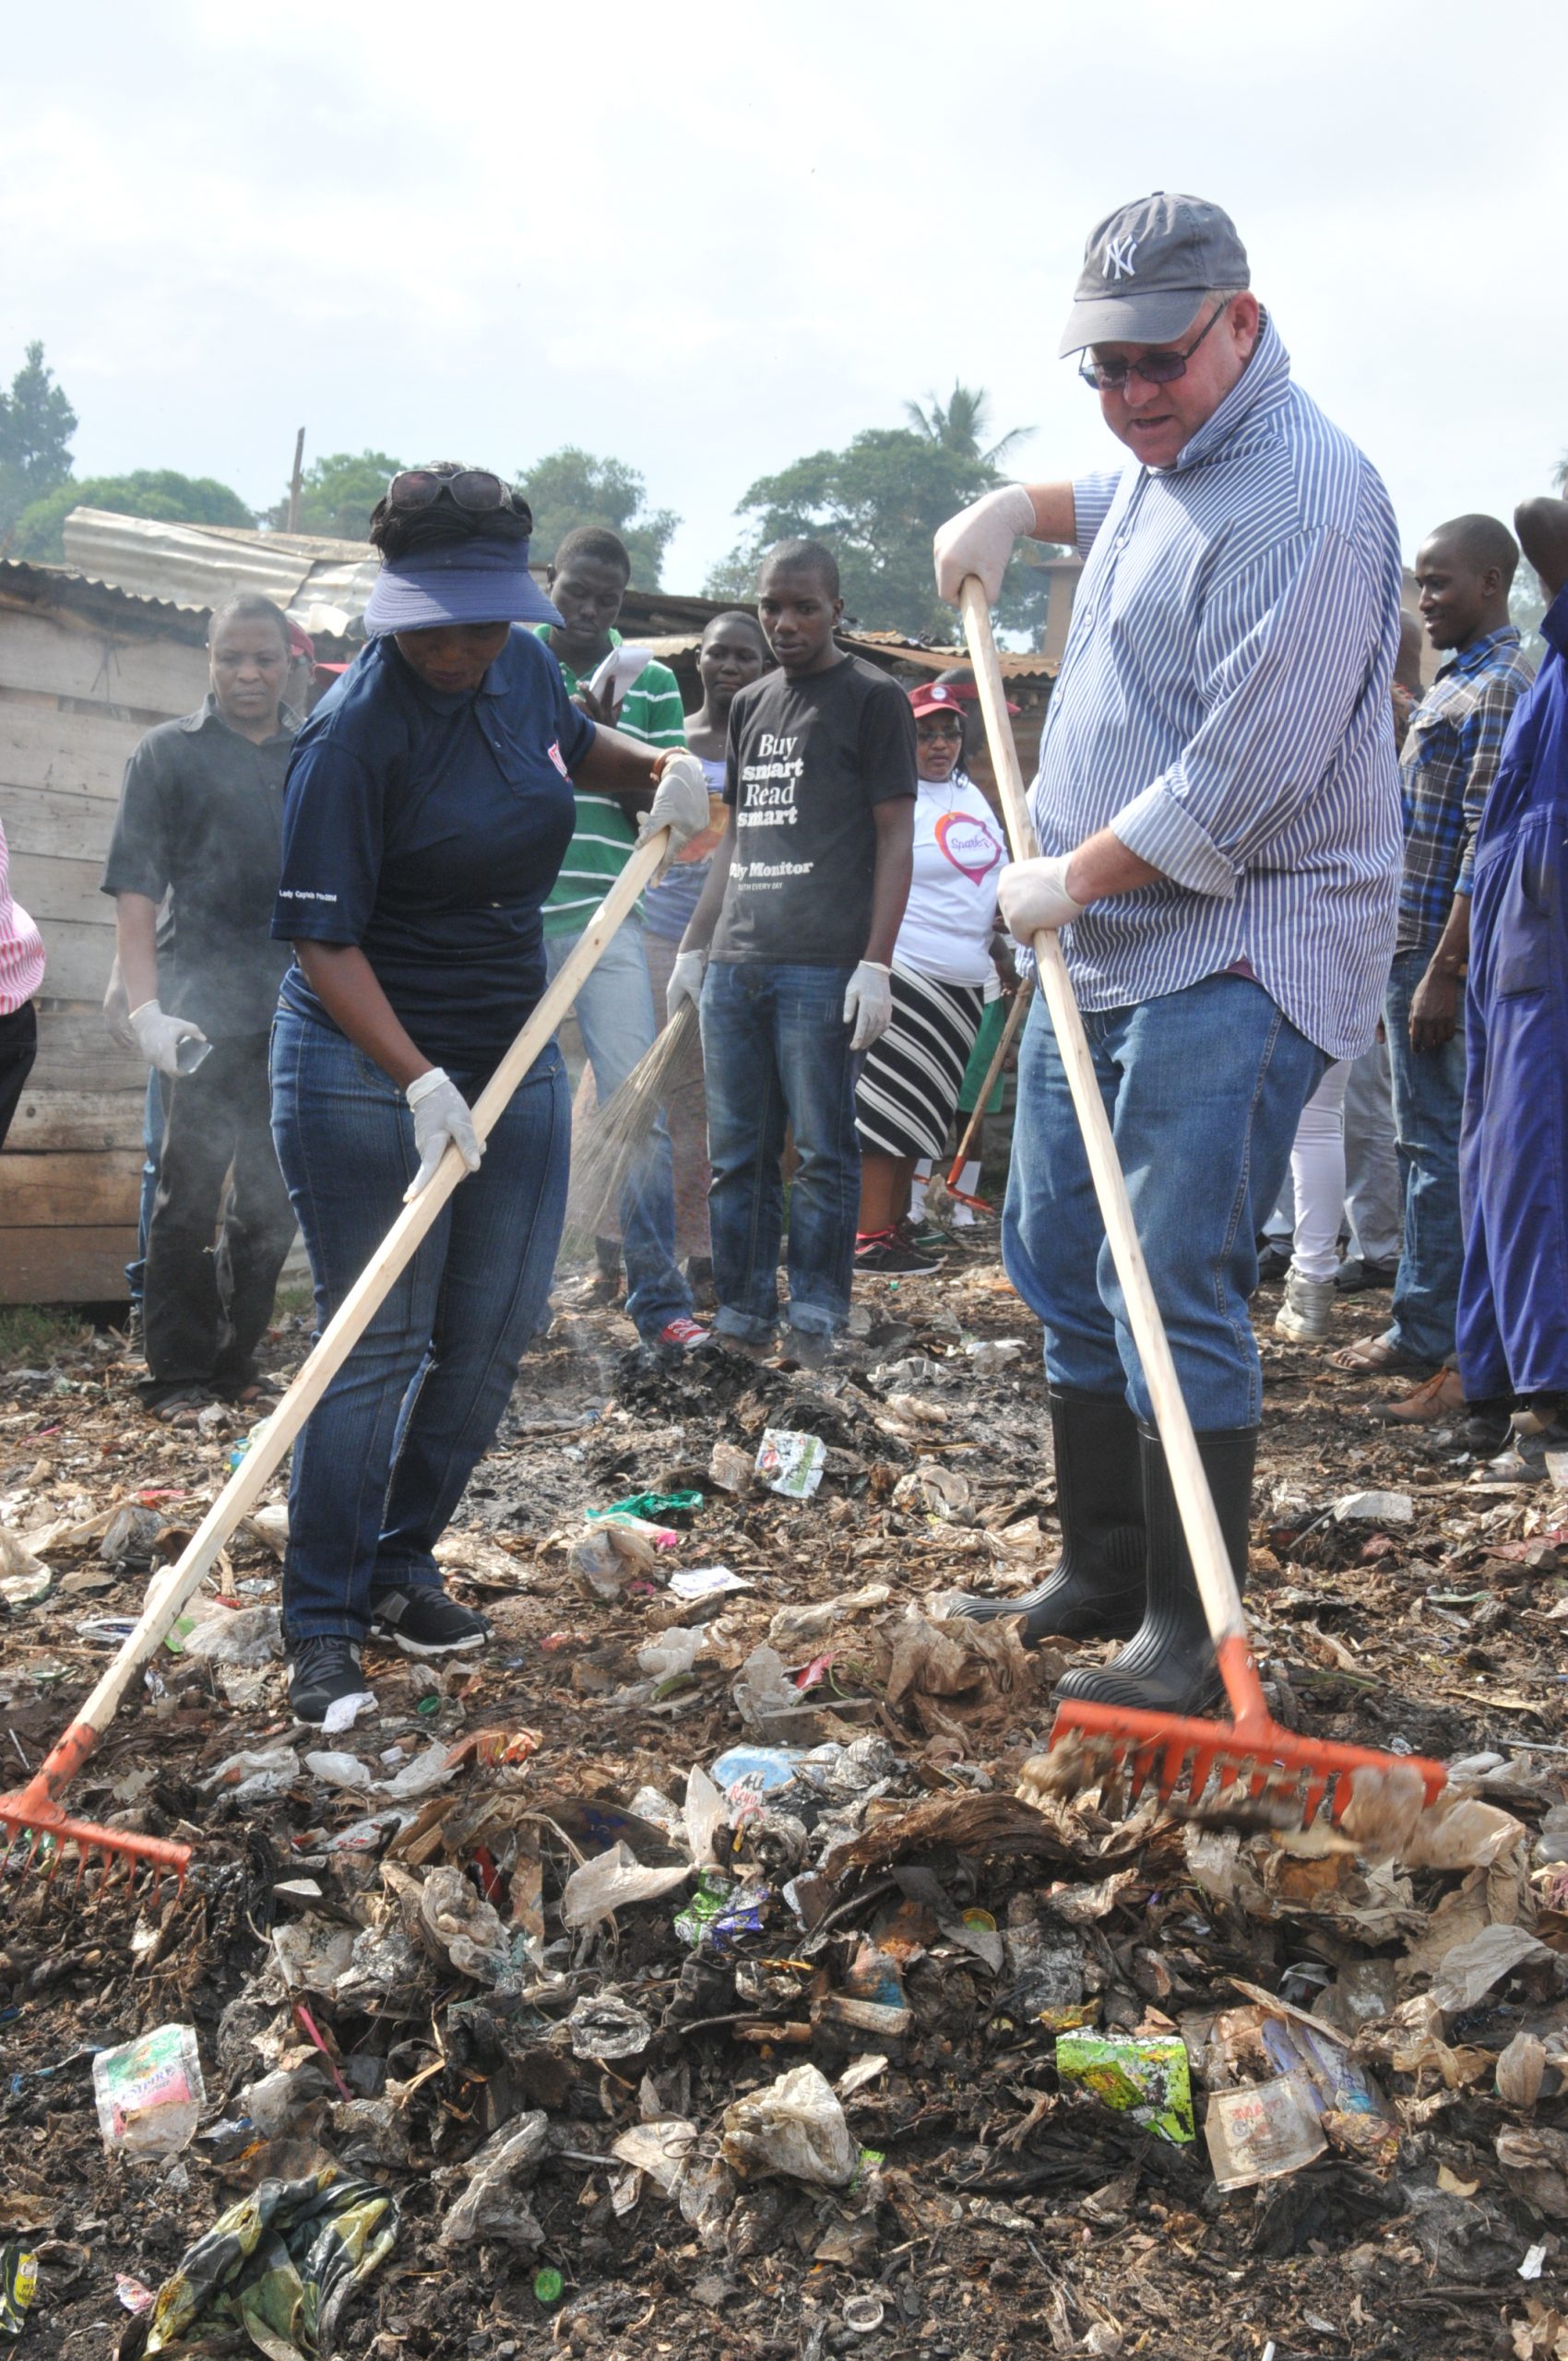 NTV's Managing Director, Aggie Asiimwe Konde and Monitor Publications Limited Managing Director, Tony Glencross participate in the community cleaning initiative.